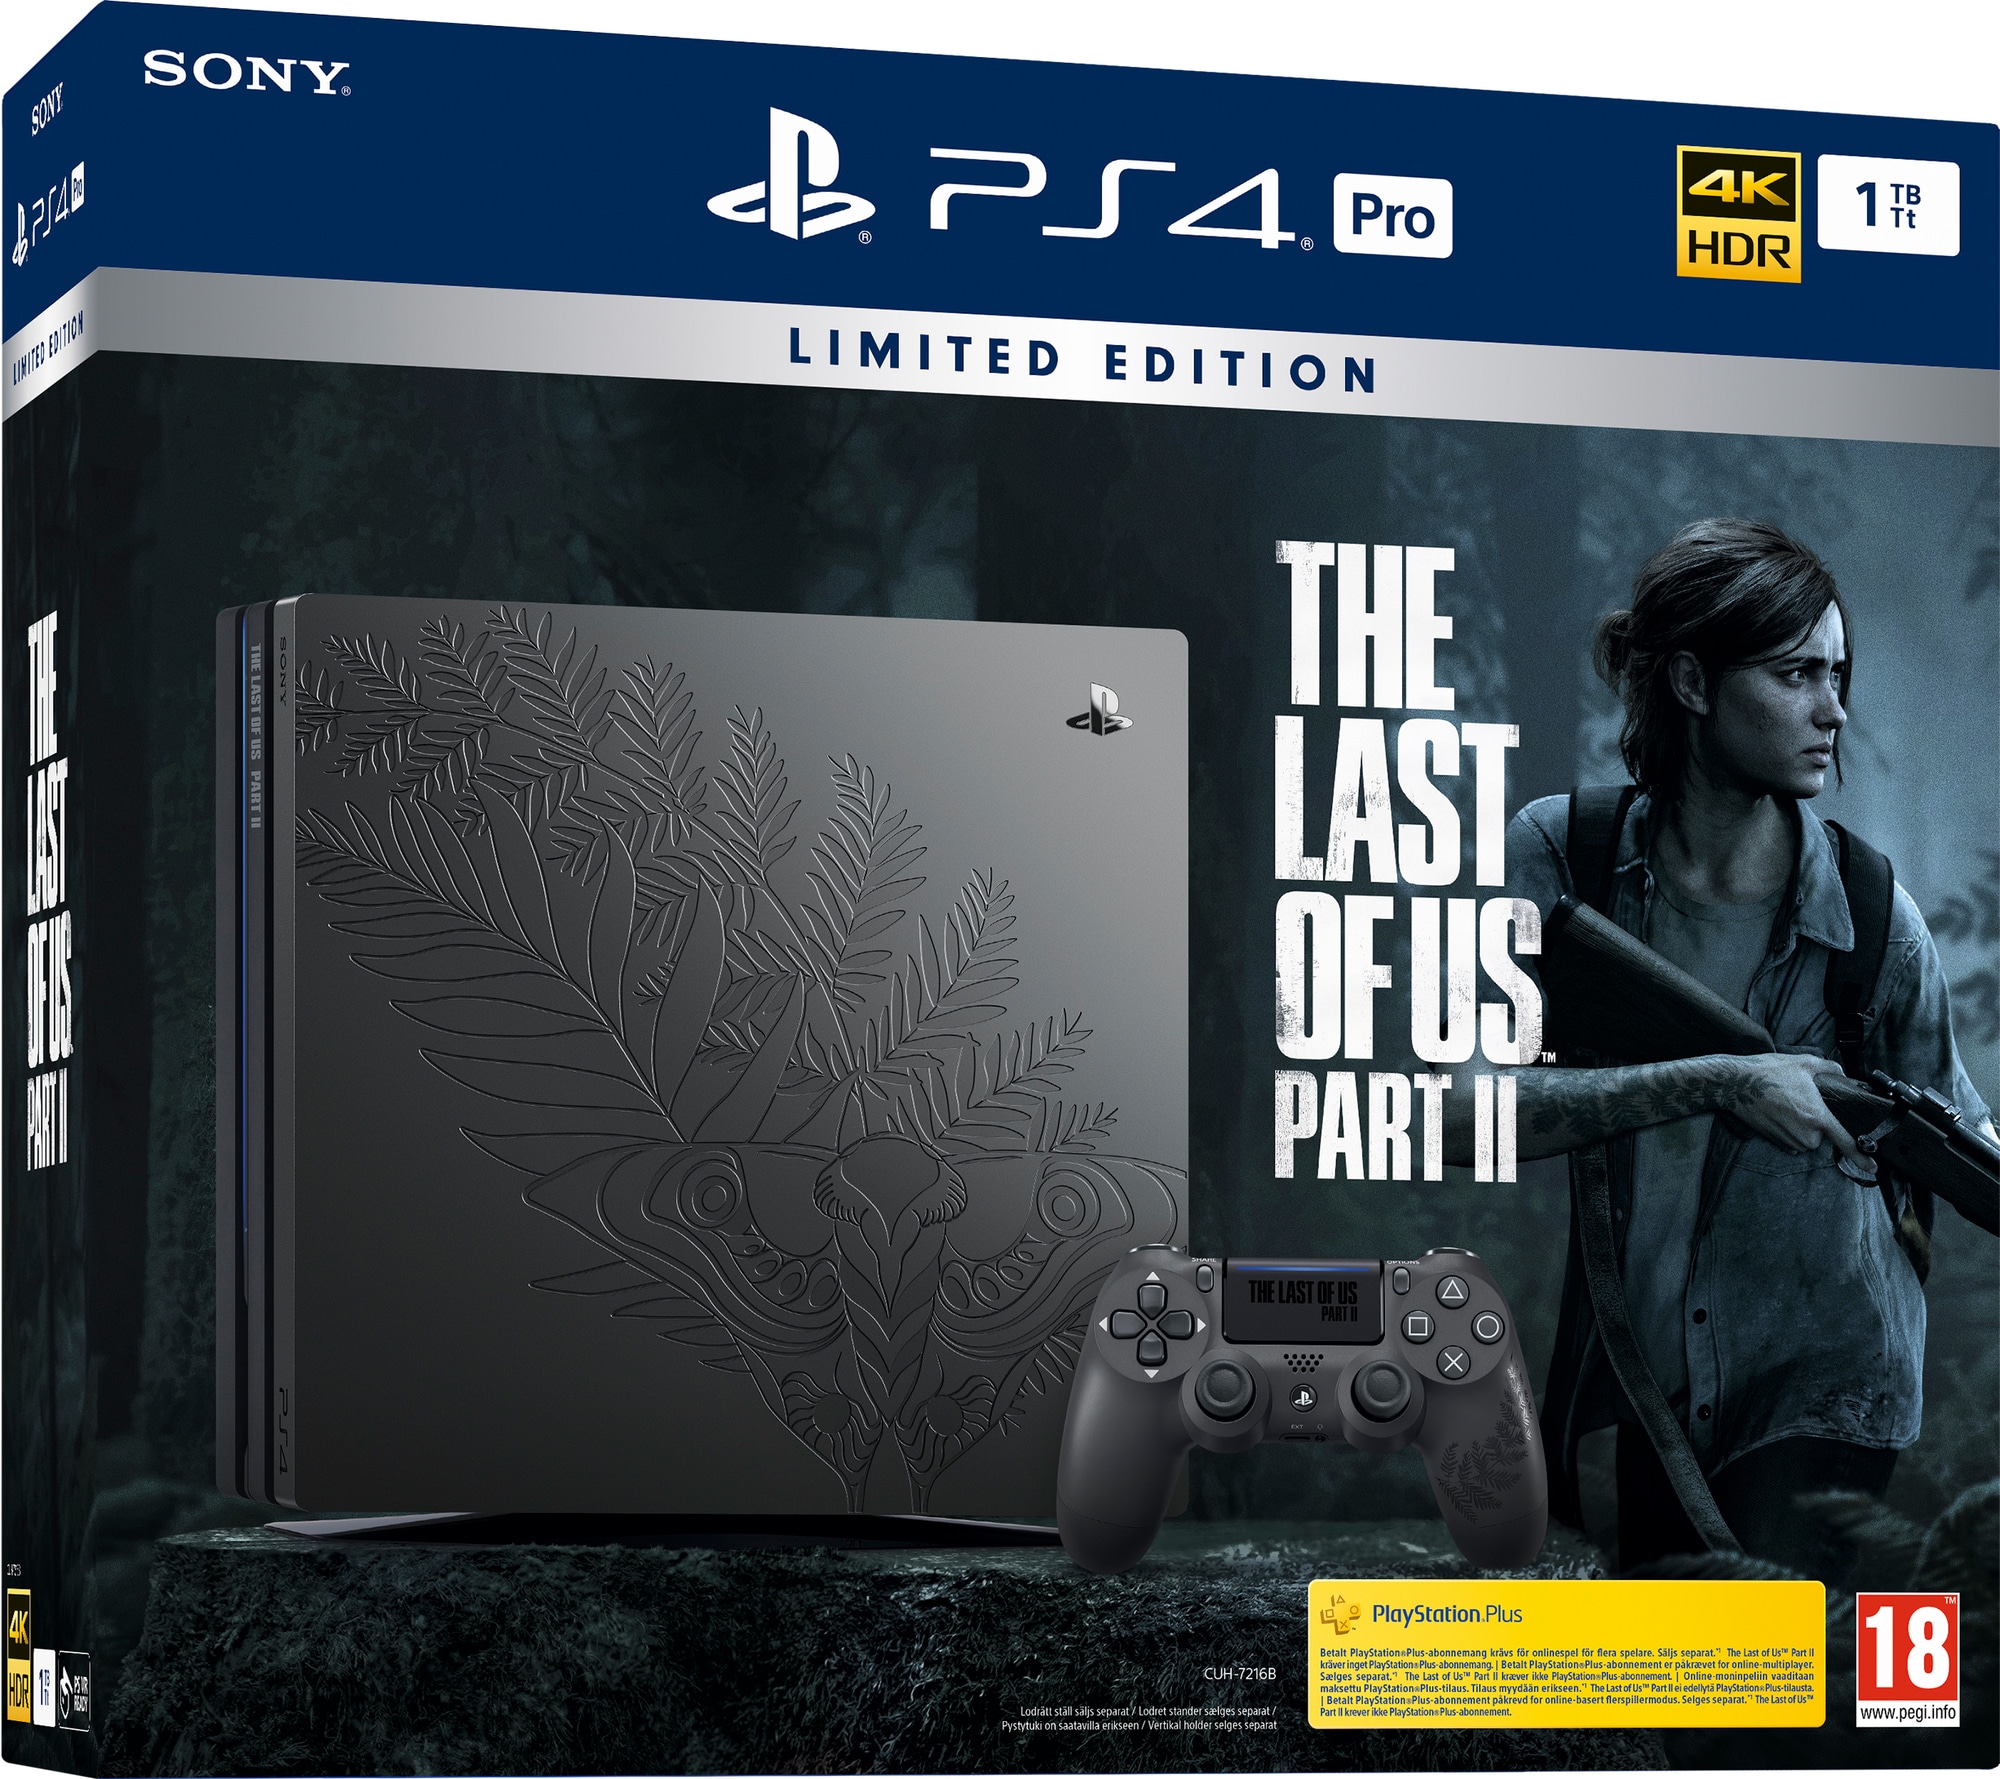 PlayStation 4 Pro 1 TB: The Last of Us Part II limited edition | Elgiganten